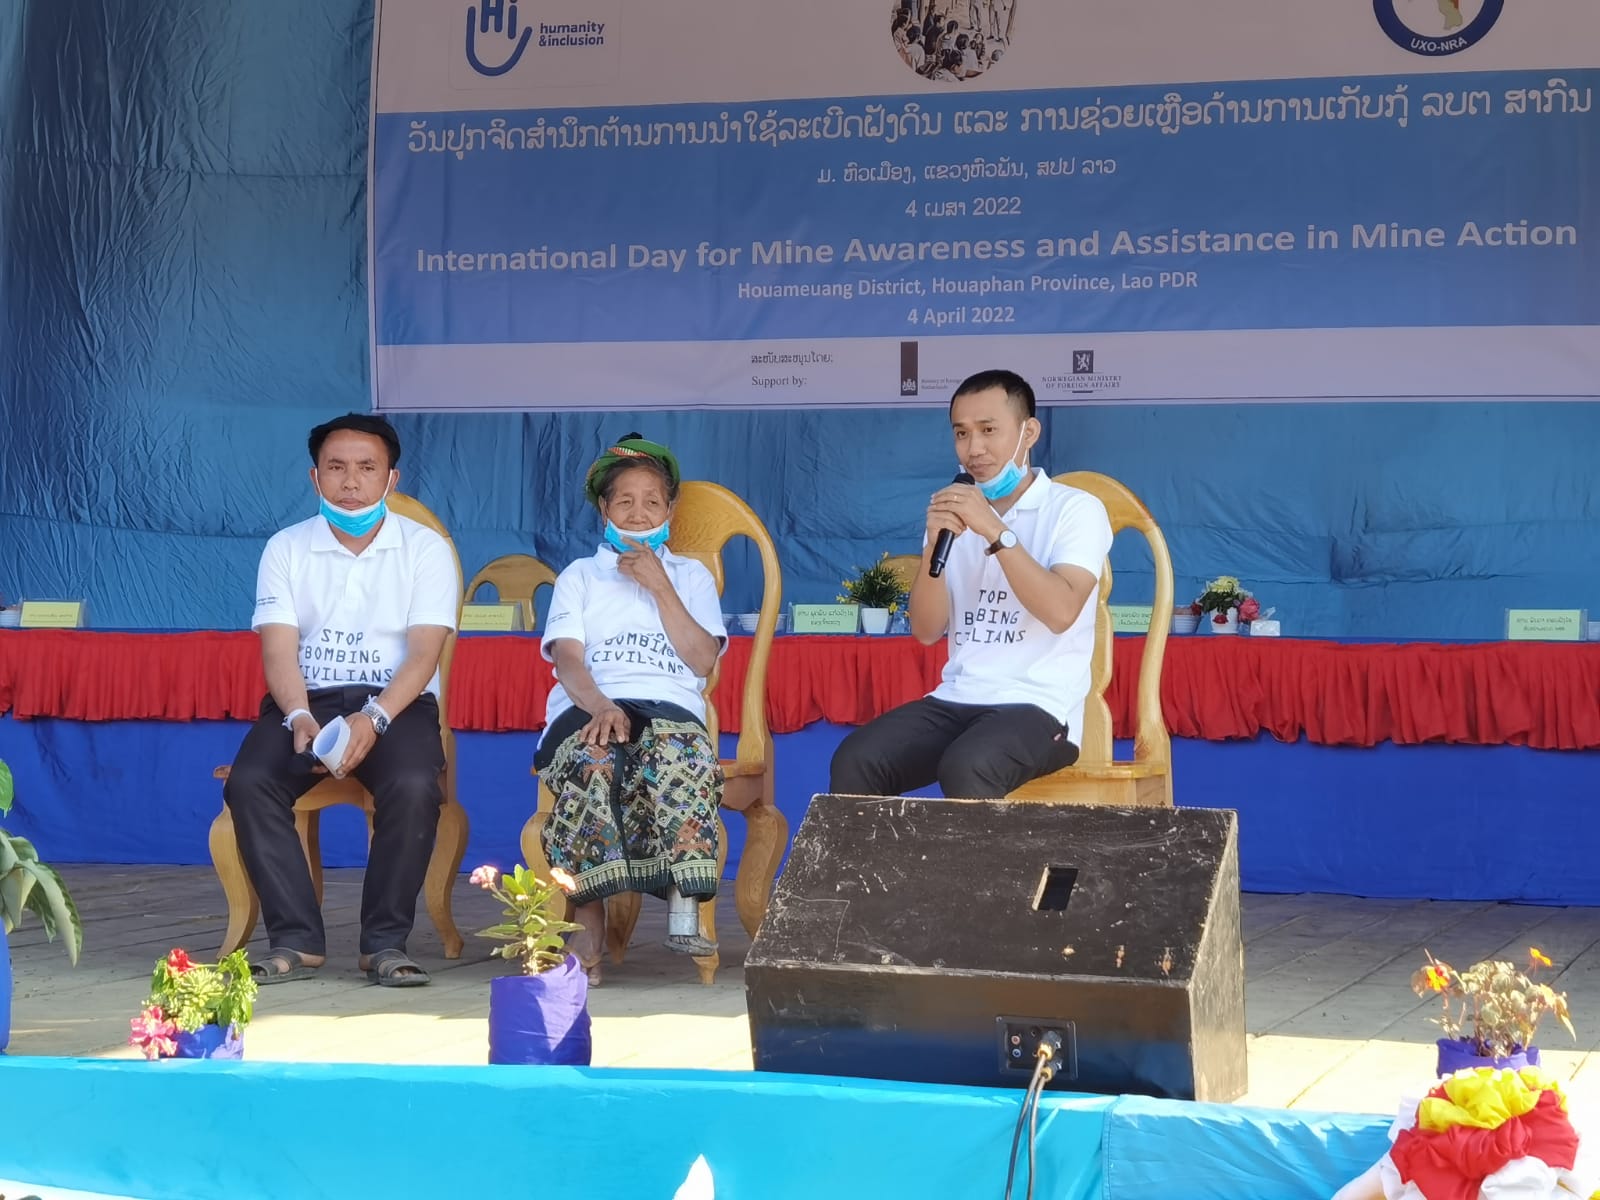 Mrs Chanh ( in the middle of the photo) on stage whose sharing his experience and story on The International day for Mine awareness and Assistance in Mine action in Houameuang on the 4th of april, 2022.